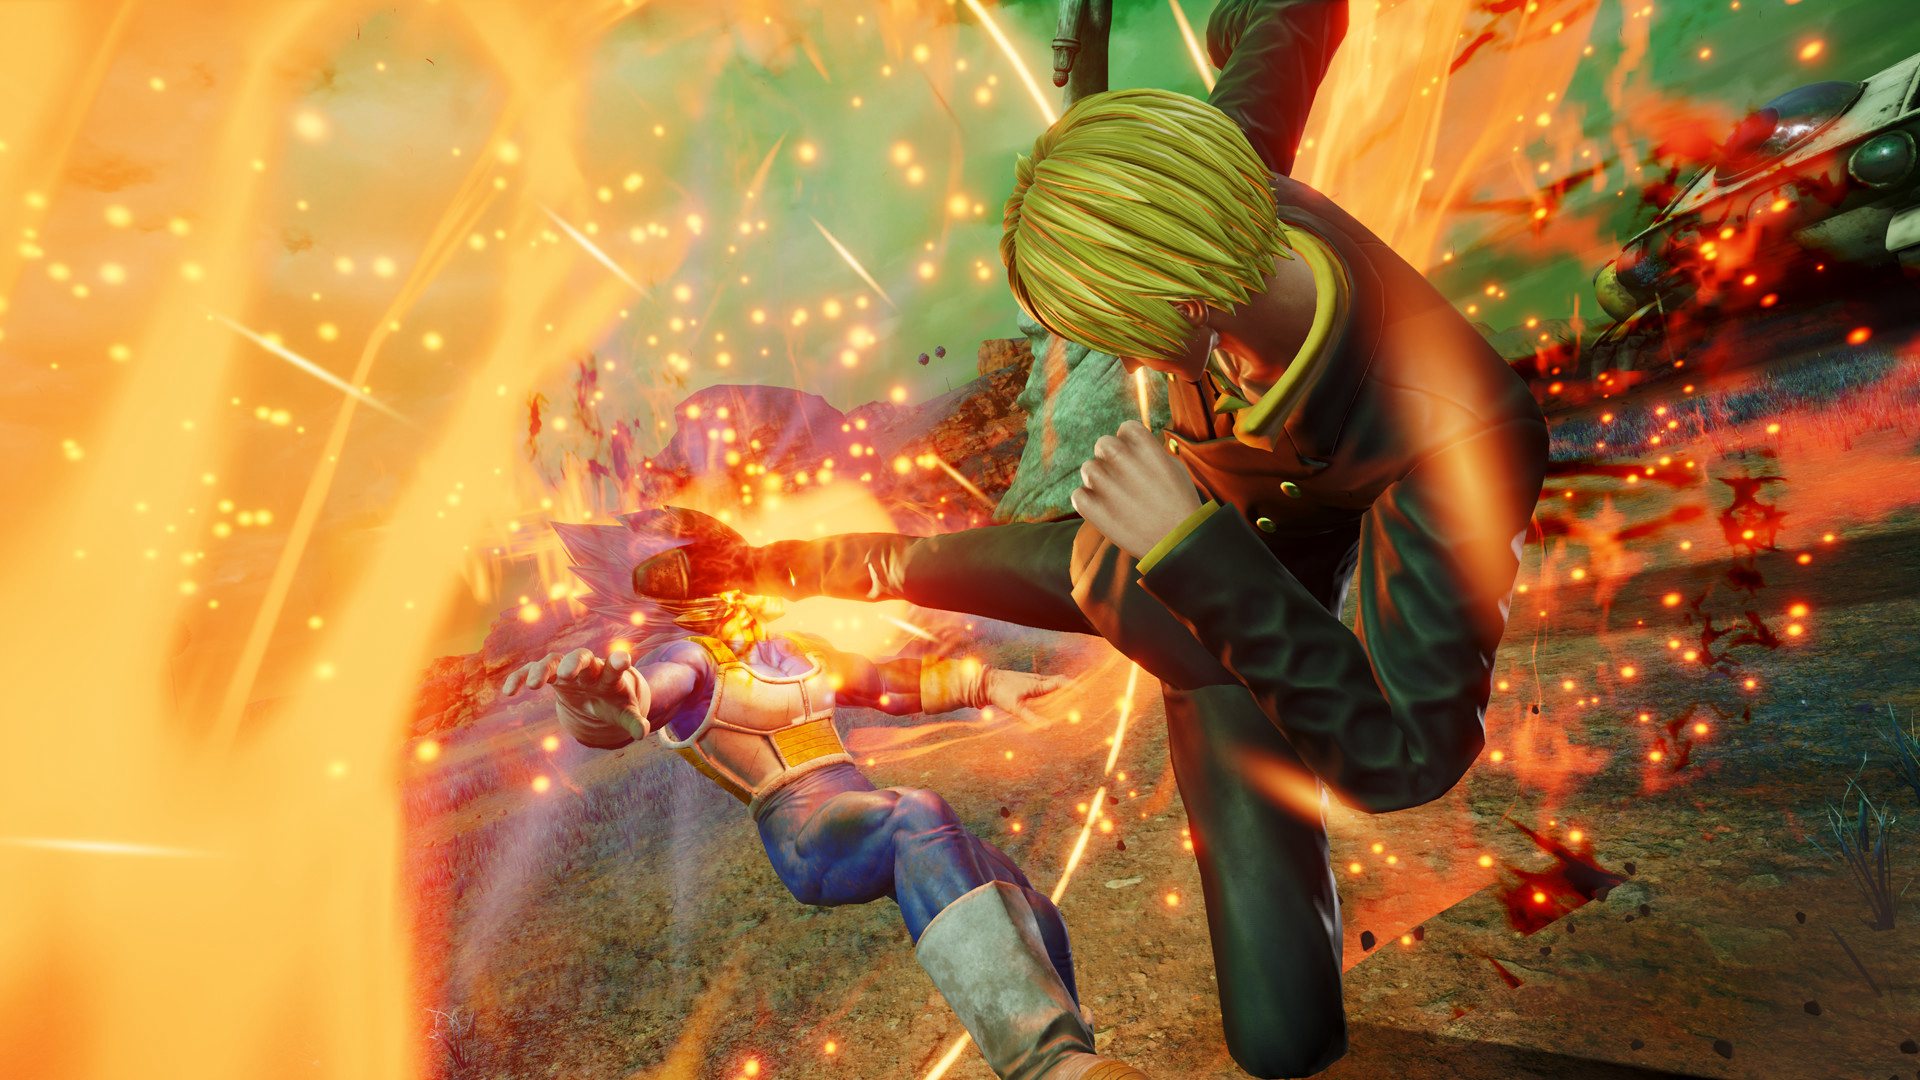 JUMP FORCE Ultimate Edition US XBOX One CD Key